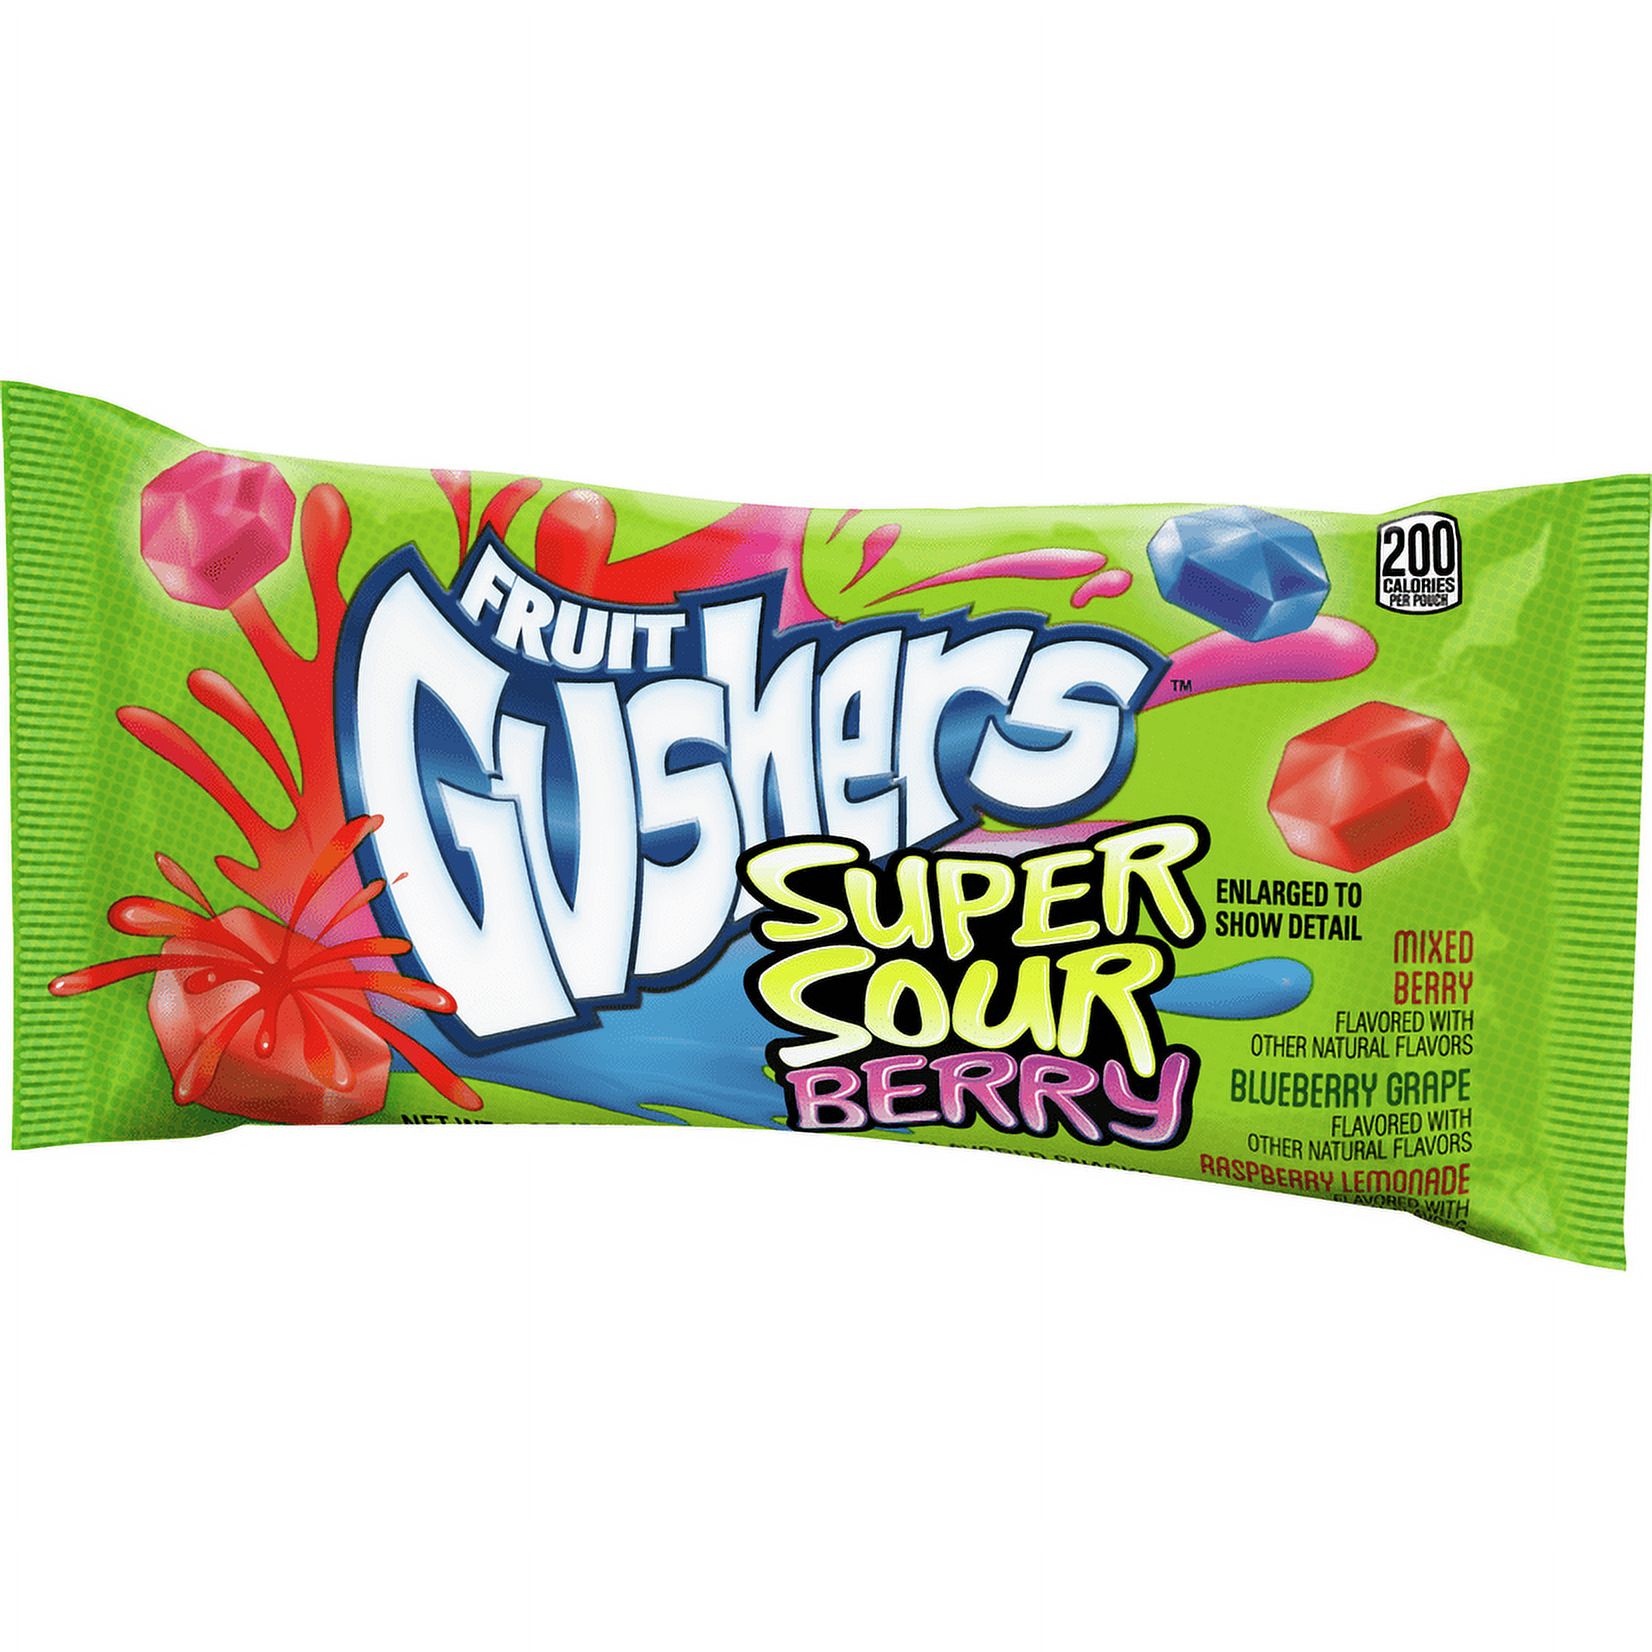 Gushers Sour Berry Fruit Flavored Snacks - image 2 of 5